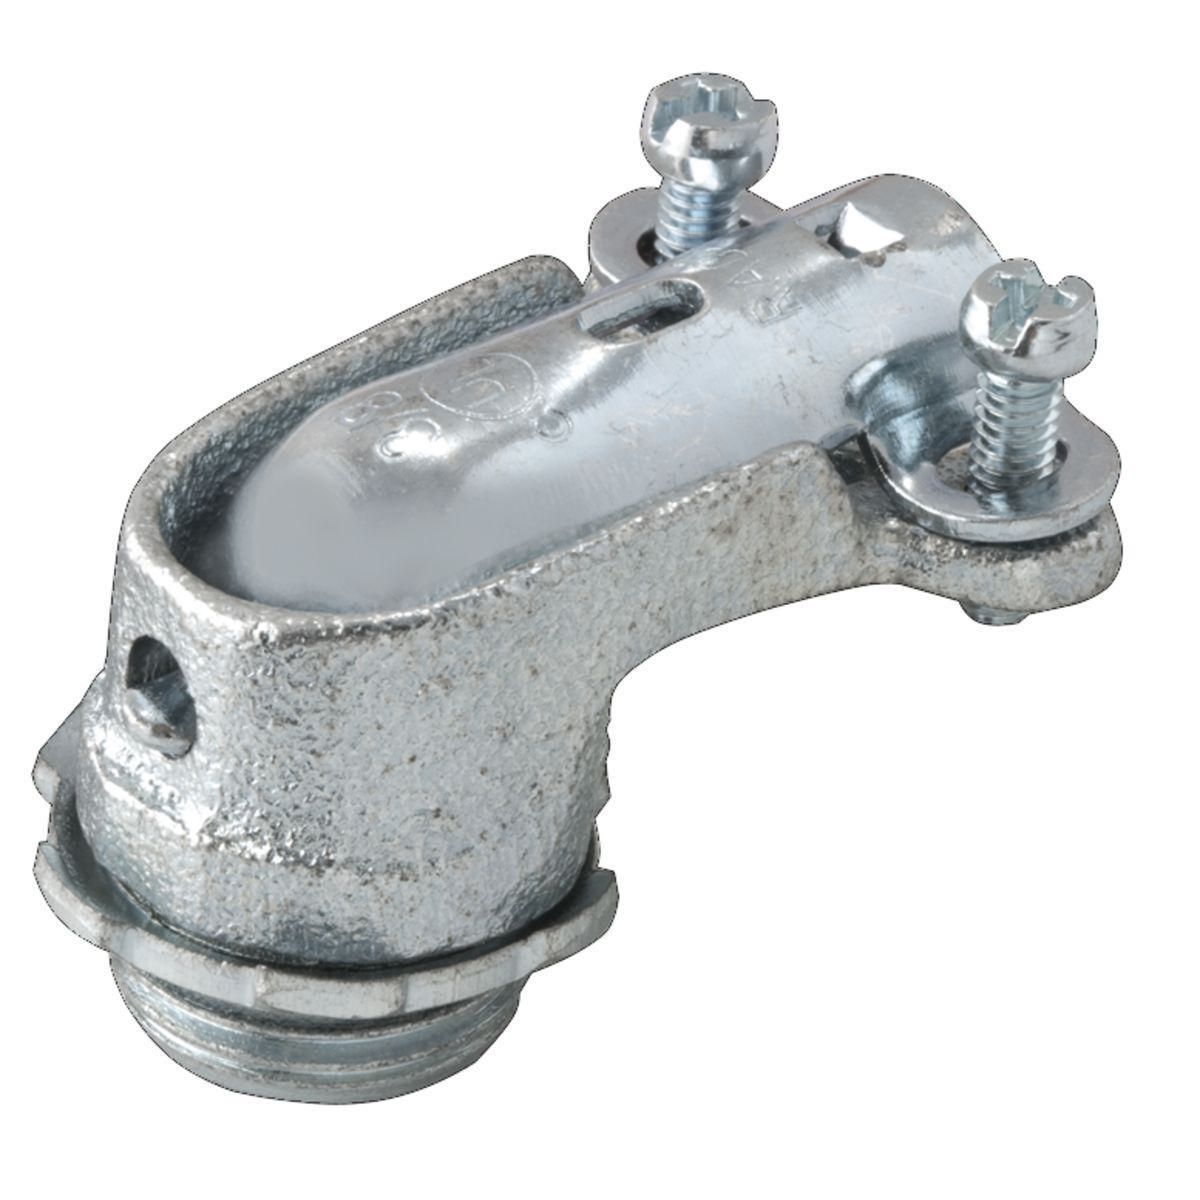 3/8 in. Flex/AC 90 Degree Squeeze Connector, Uninsulated, for FMC